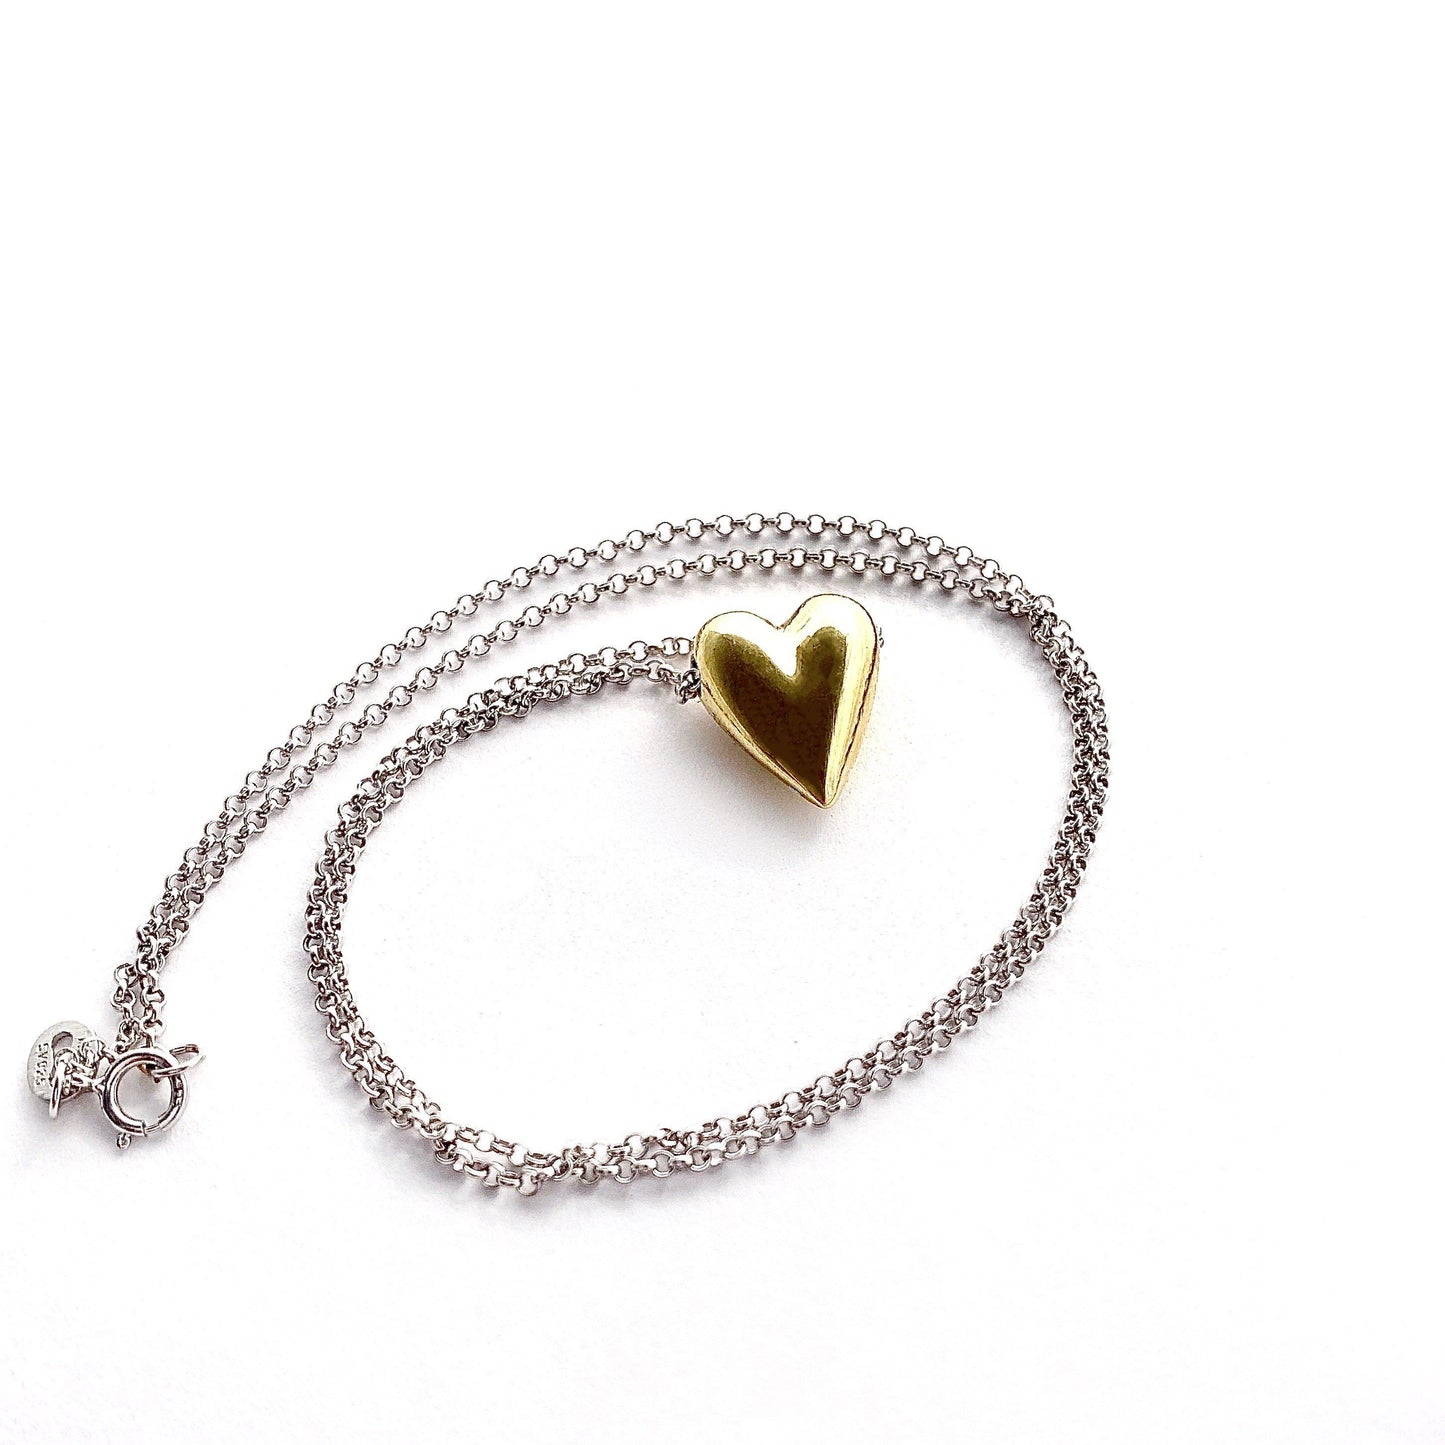 Necklace - Love Floating Heart Necklace | Love Collection